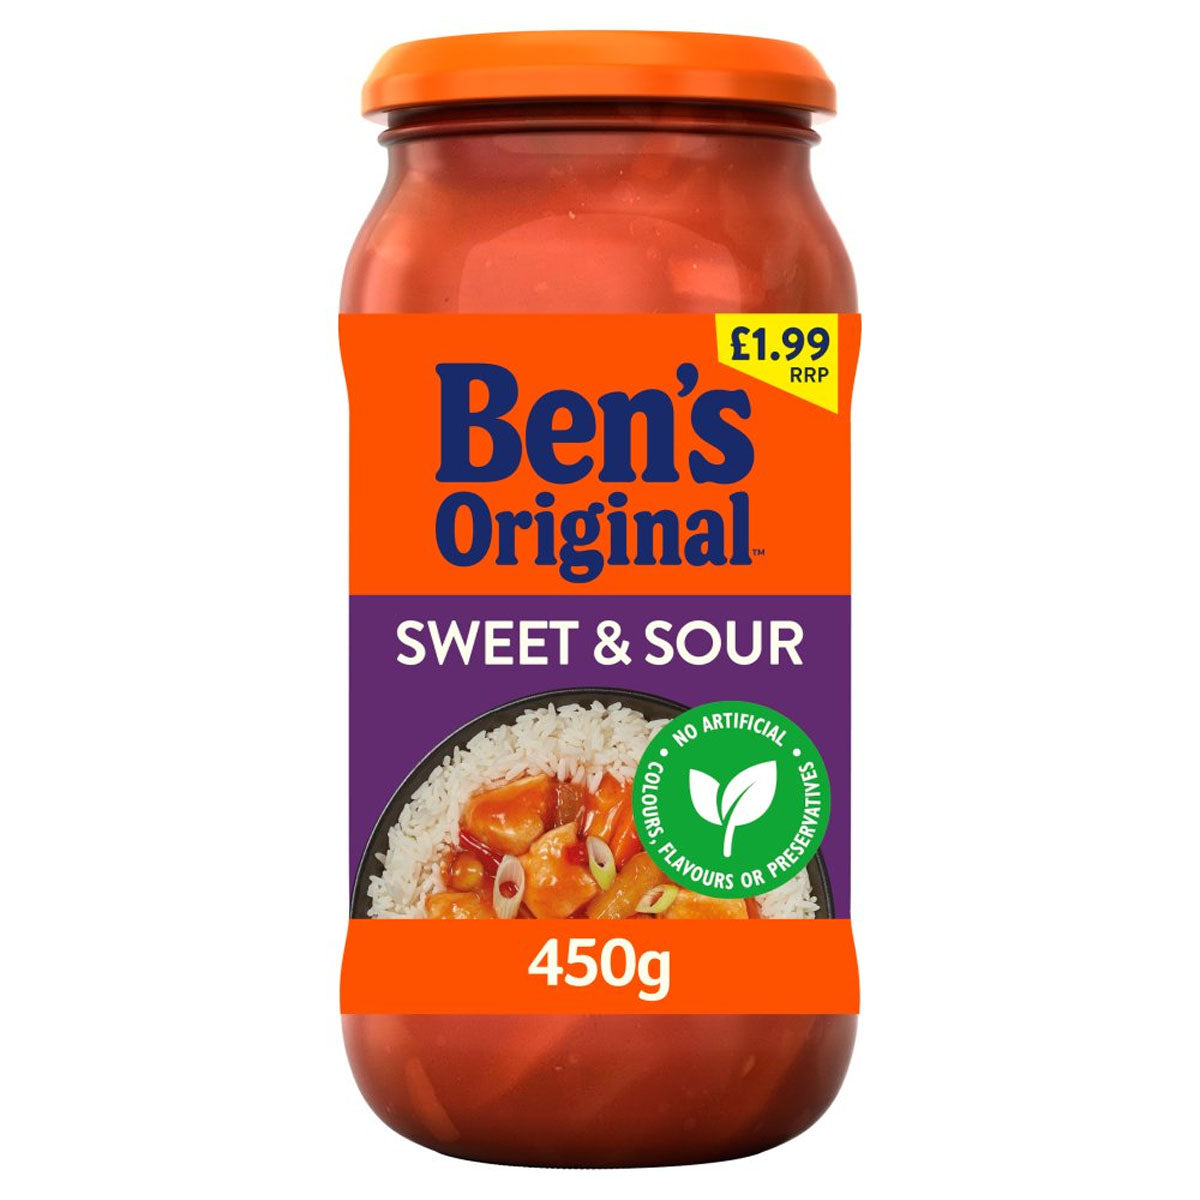 A jar of Bens Original - Sweet and Sour Sauce - 450g with a label.